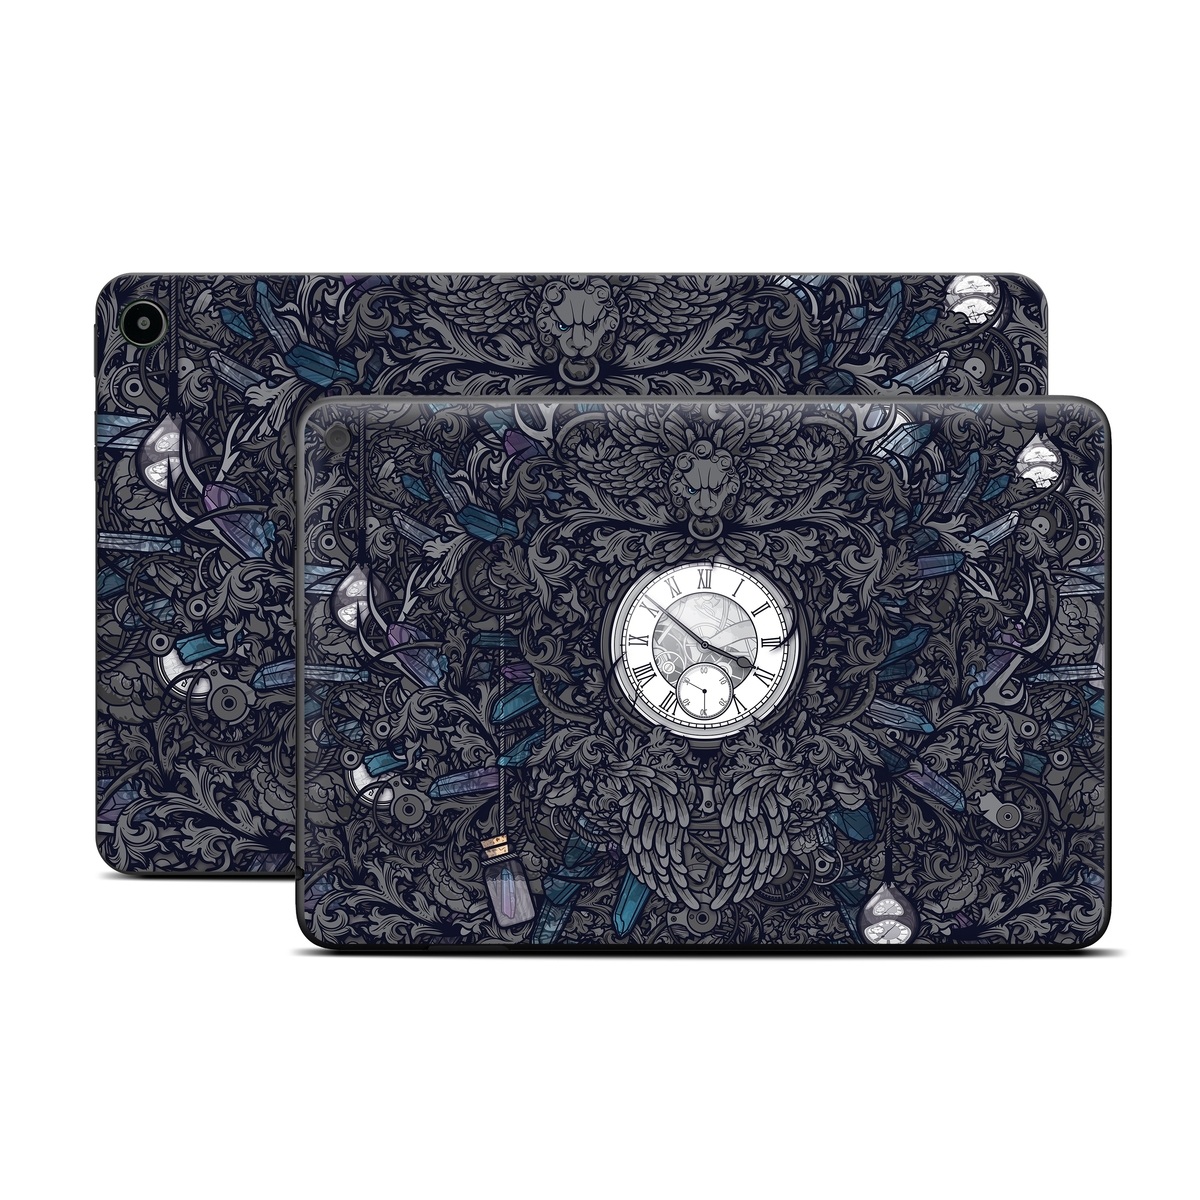 Amazon Fire Tablet Series Skin Skin design of Blue, Pattern, Psychedelic art, Design, Circle, Art, Font, Graphic design, Visual arts, Illustration, with black, gray colors